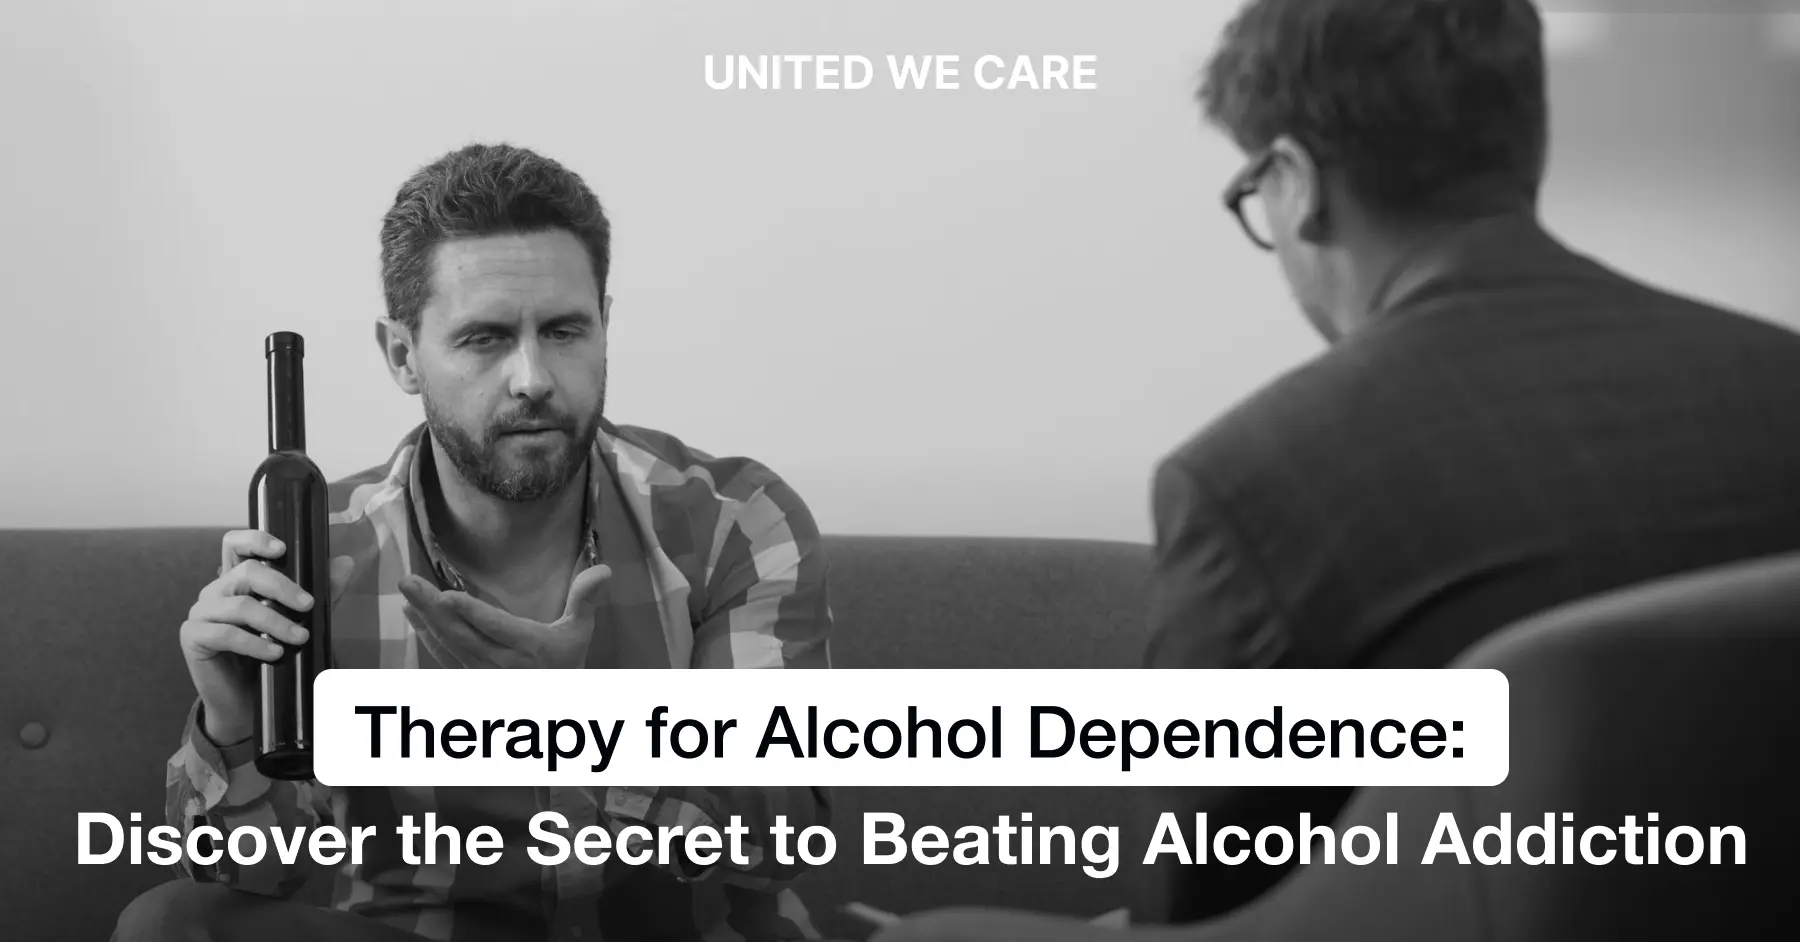 Therapy for Alcohol Dependence: Discover the Secret to Beating Alcohol Addiction